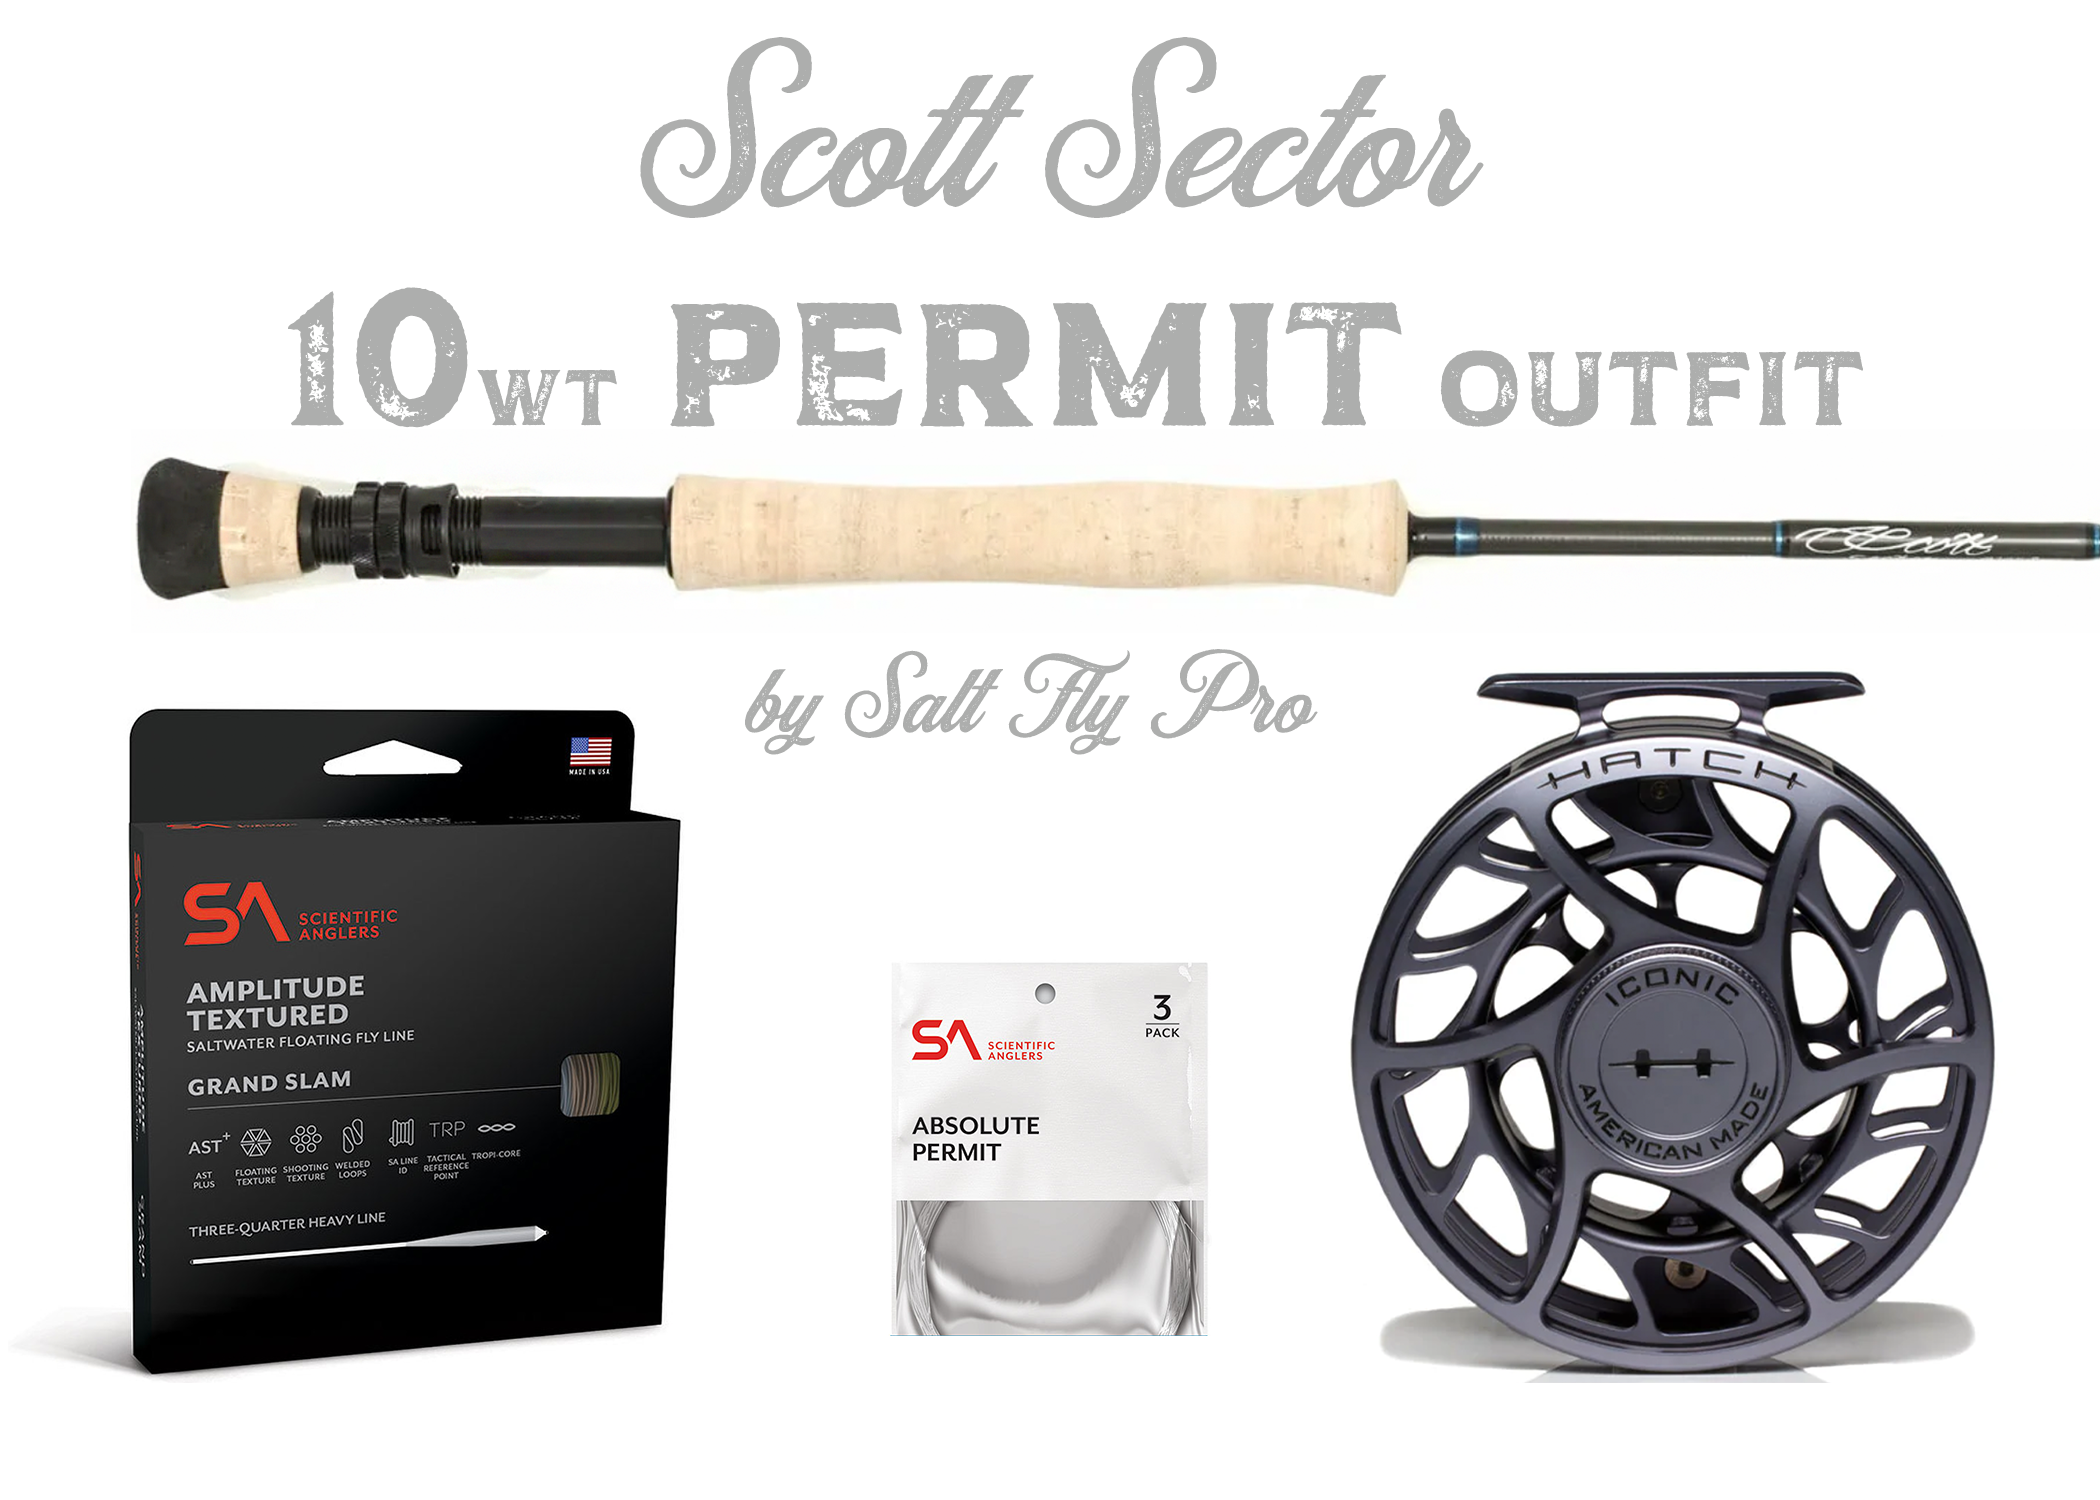 Scott Sector 10wt PERMIT Outfit Combo - NEW!